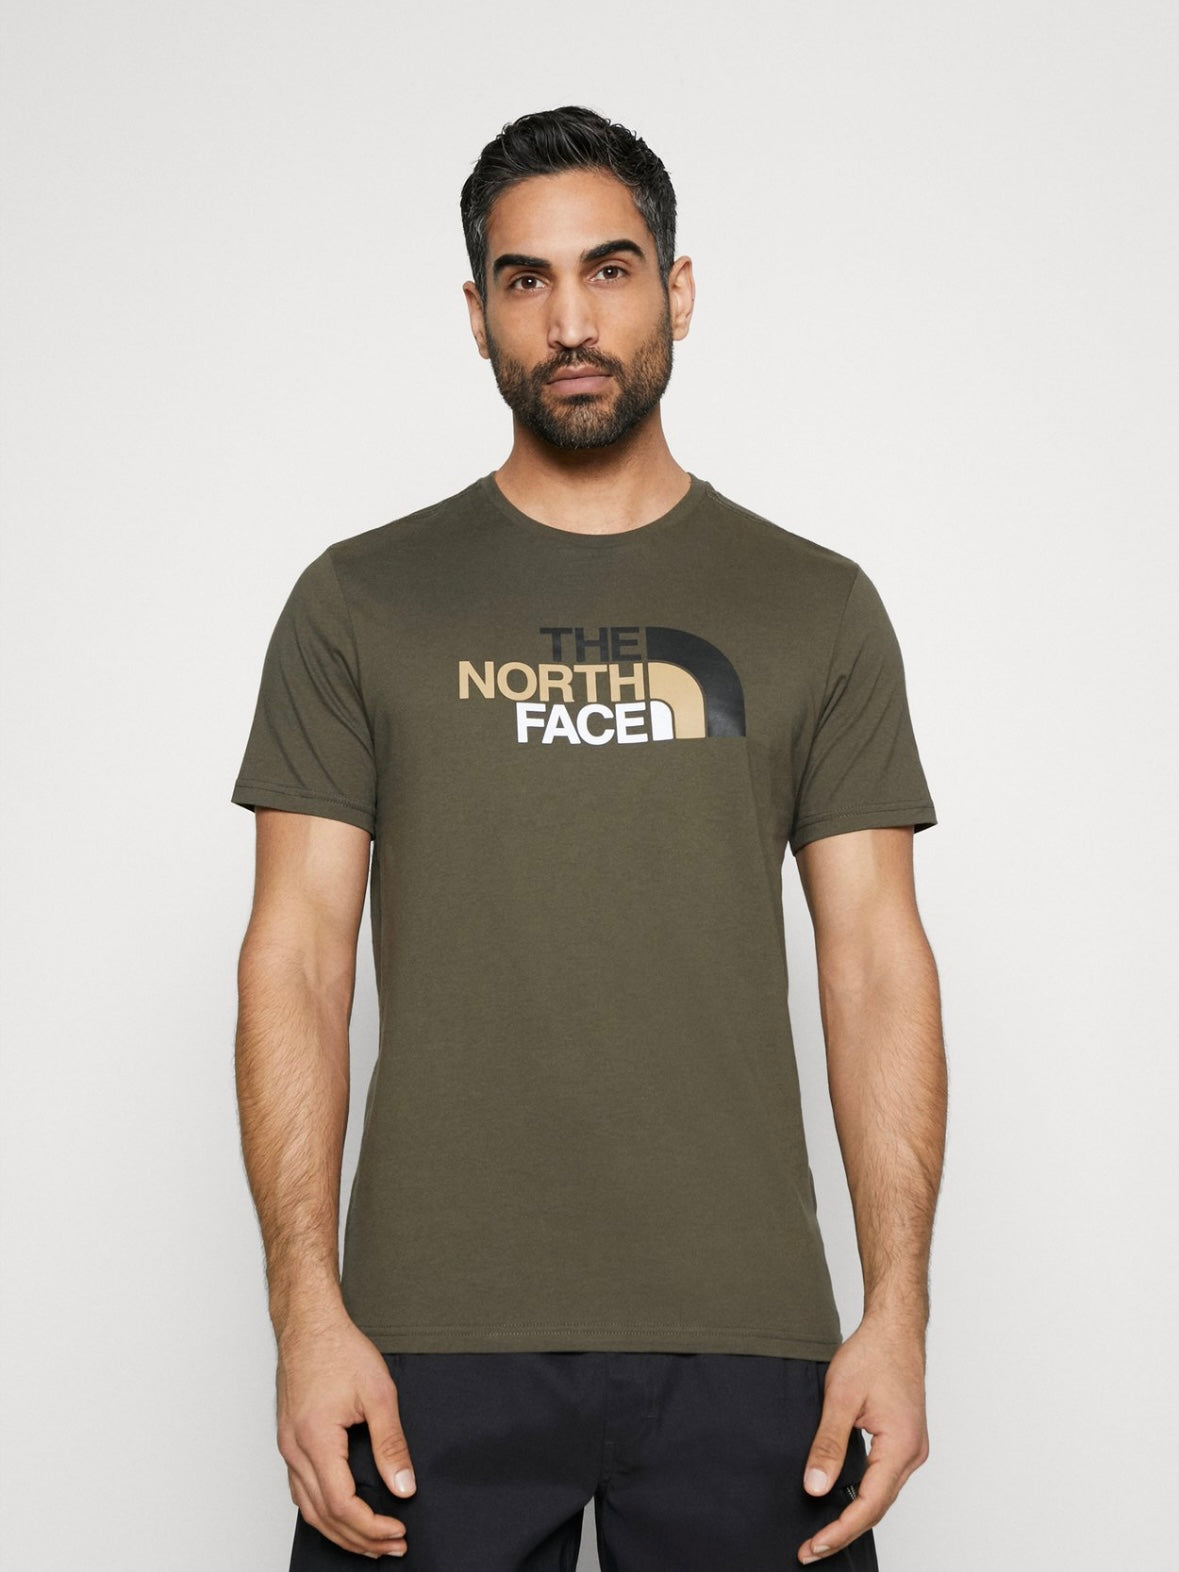 THE NORTH FACE - T-Shirt